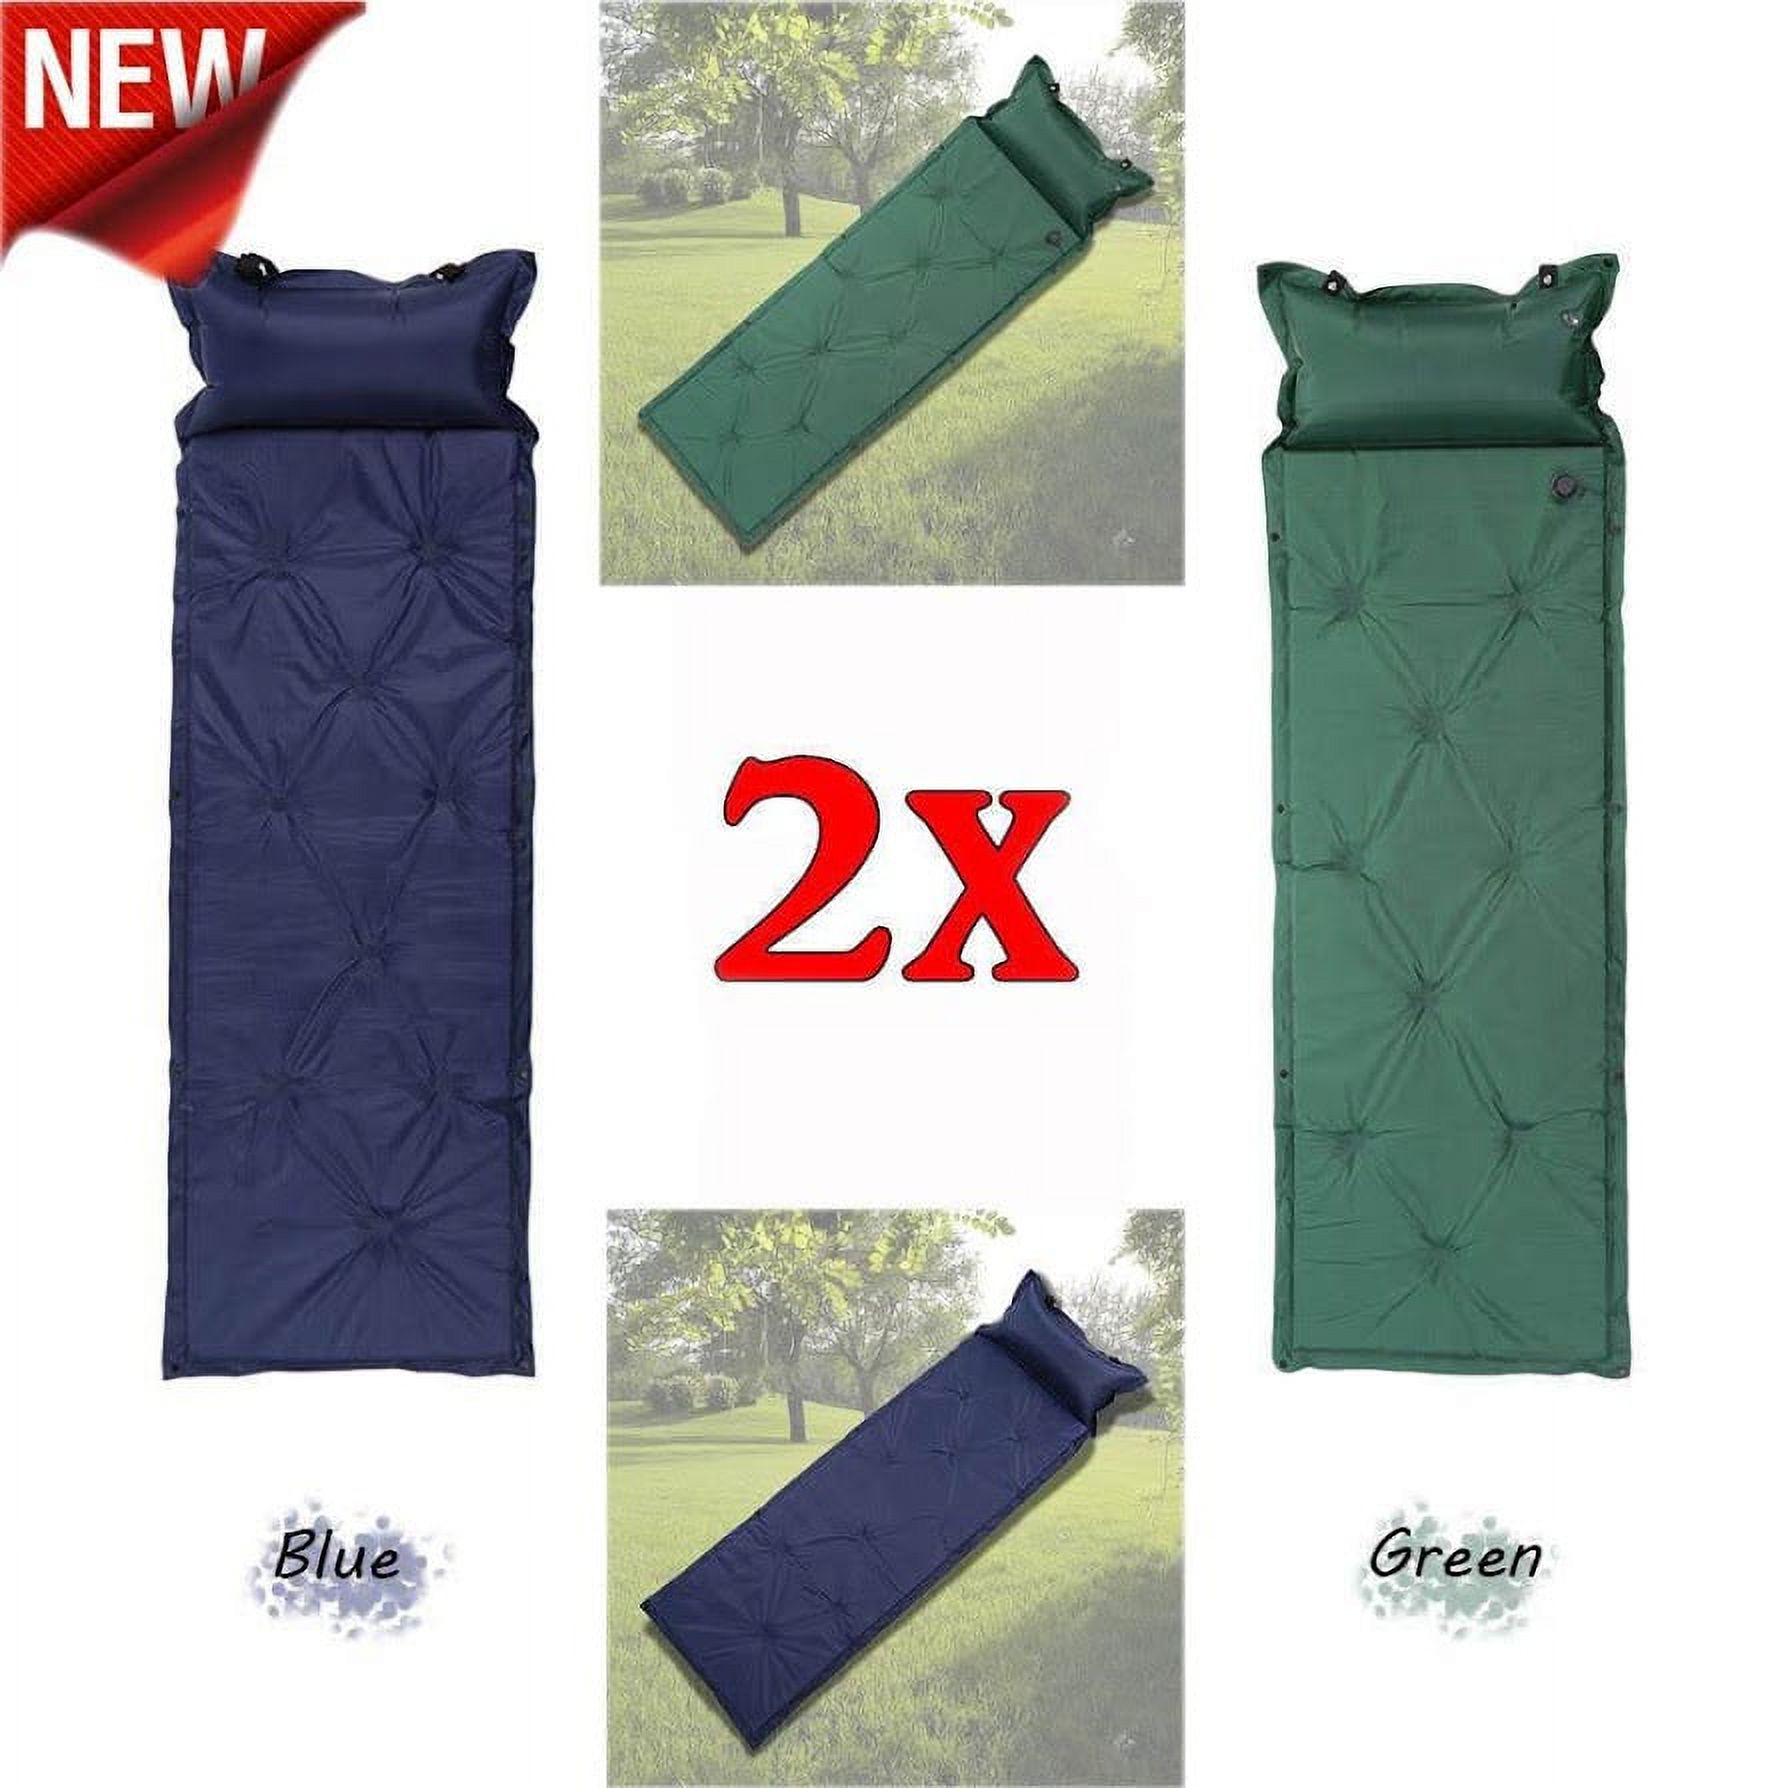 Self Inflating Sleeping Pad Camping Pad Connectable Waterproof Camping matches Designed for Tent Green - image 4 of 6